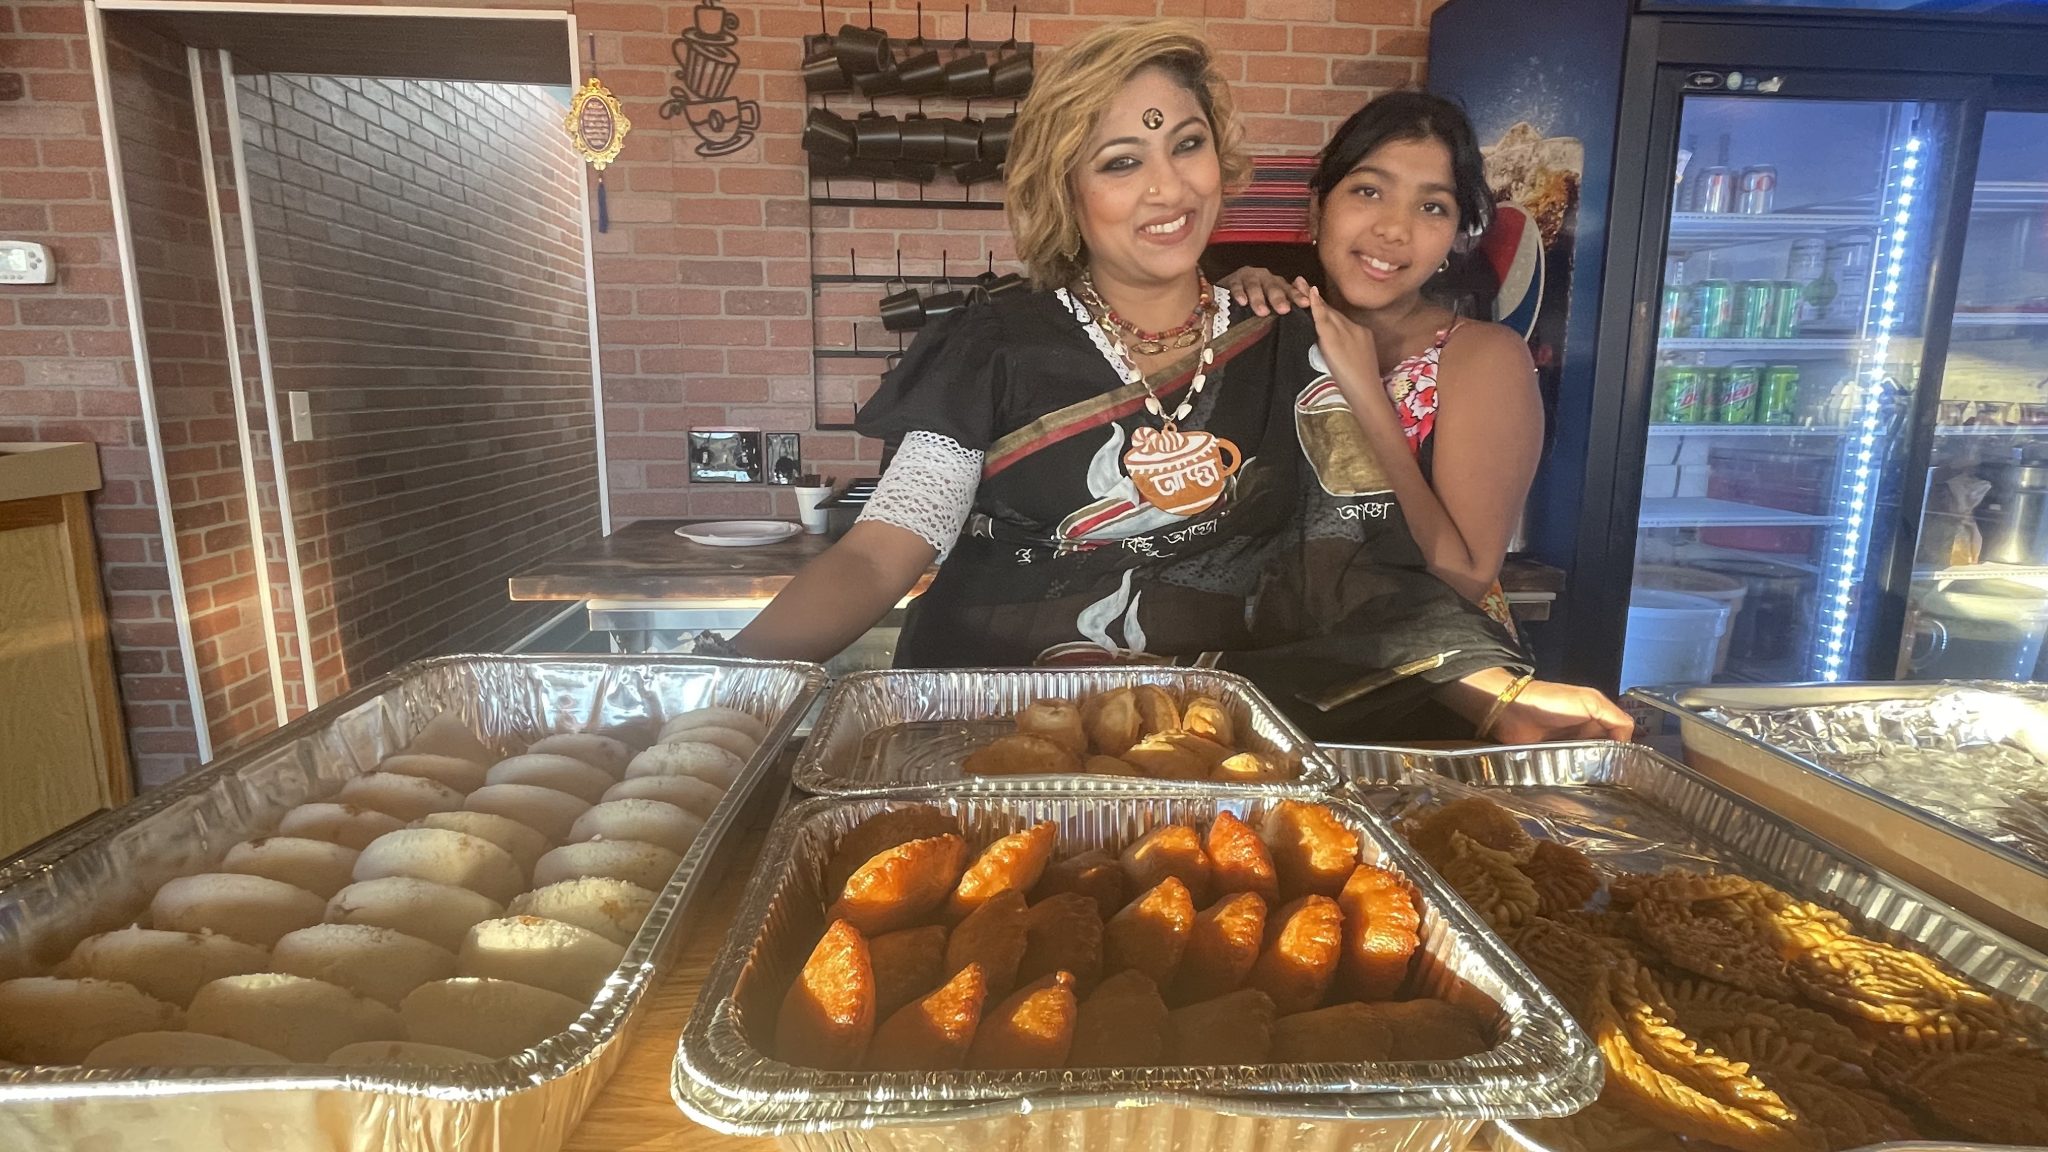 A woman and her daughter smile with several trays of food